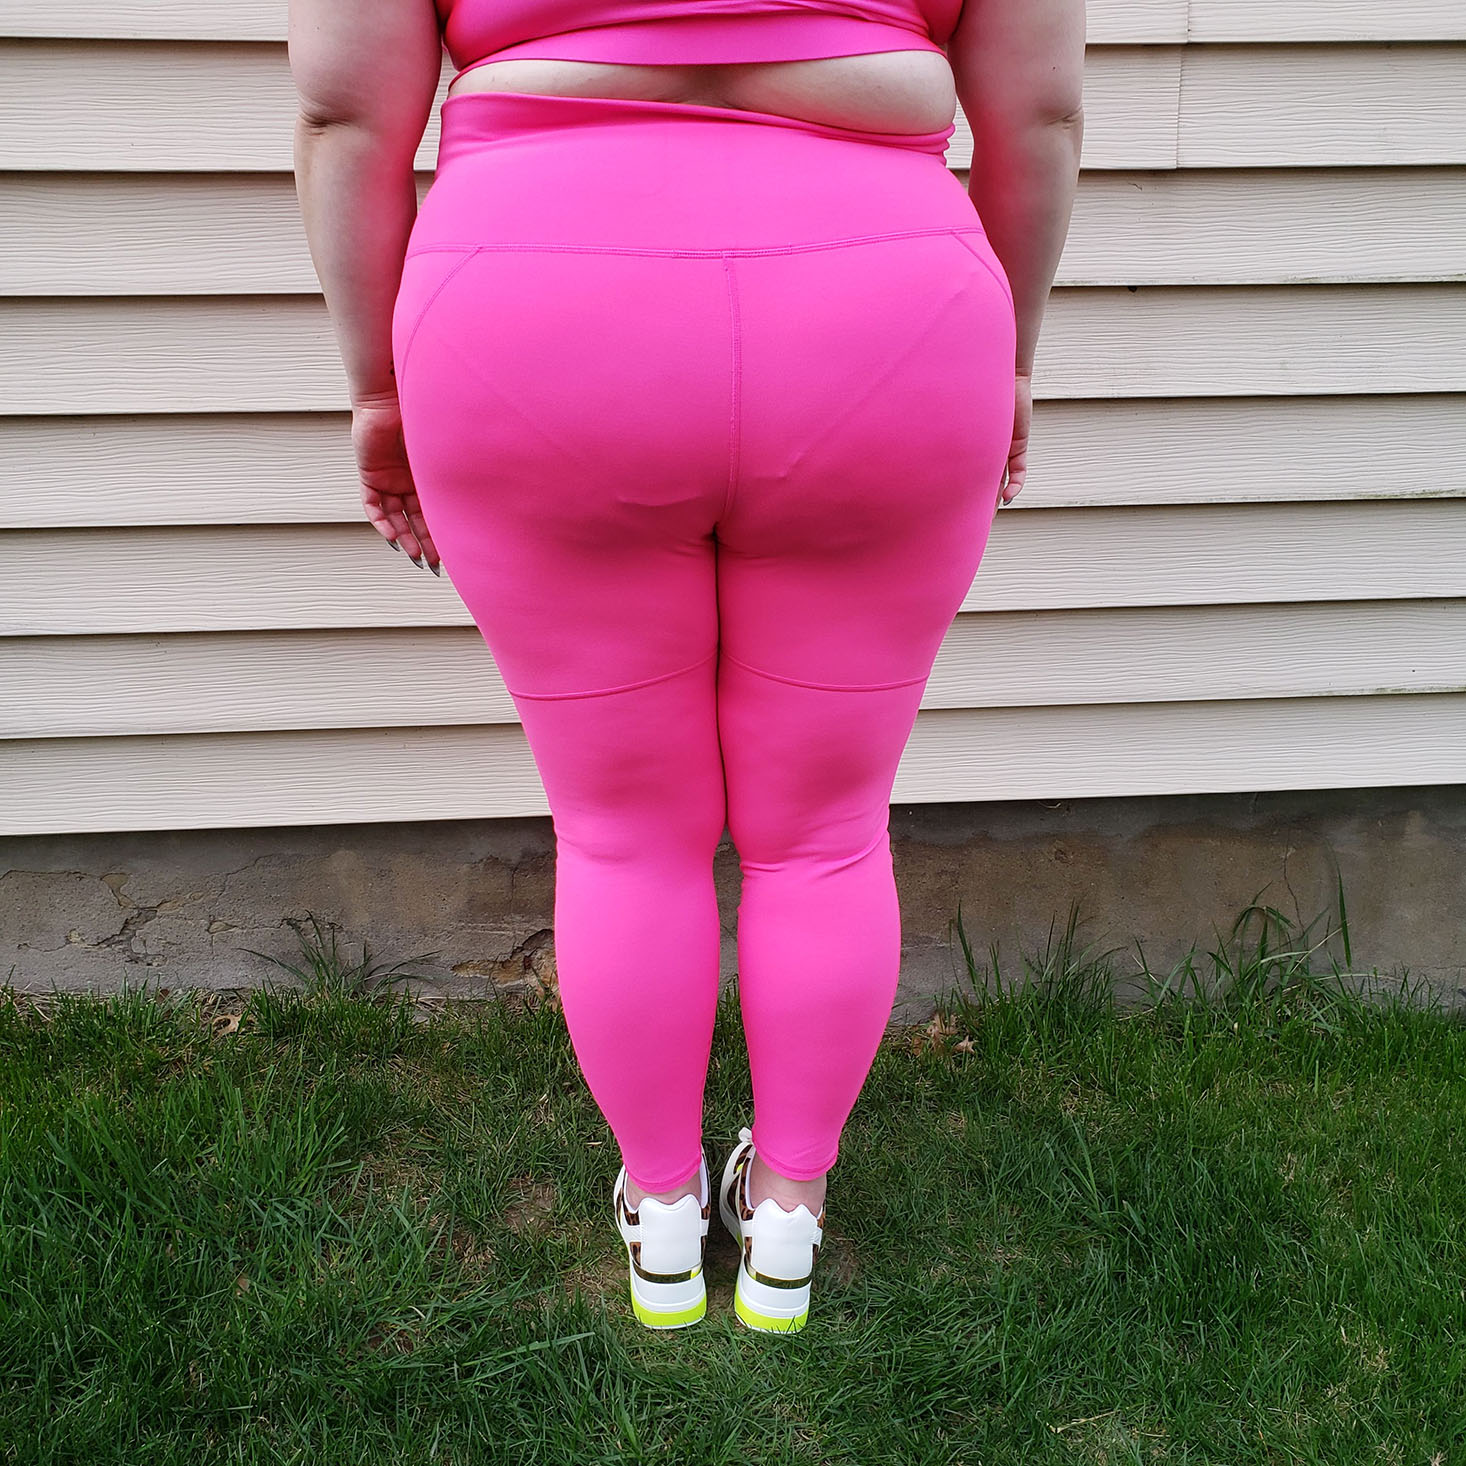 An Honest Fabletics Plus Size Review - And Hattie Makes Three